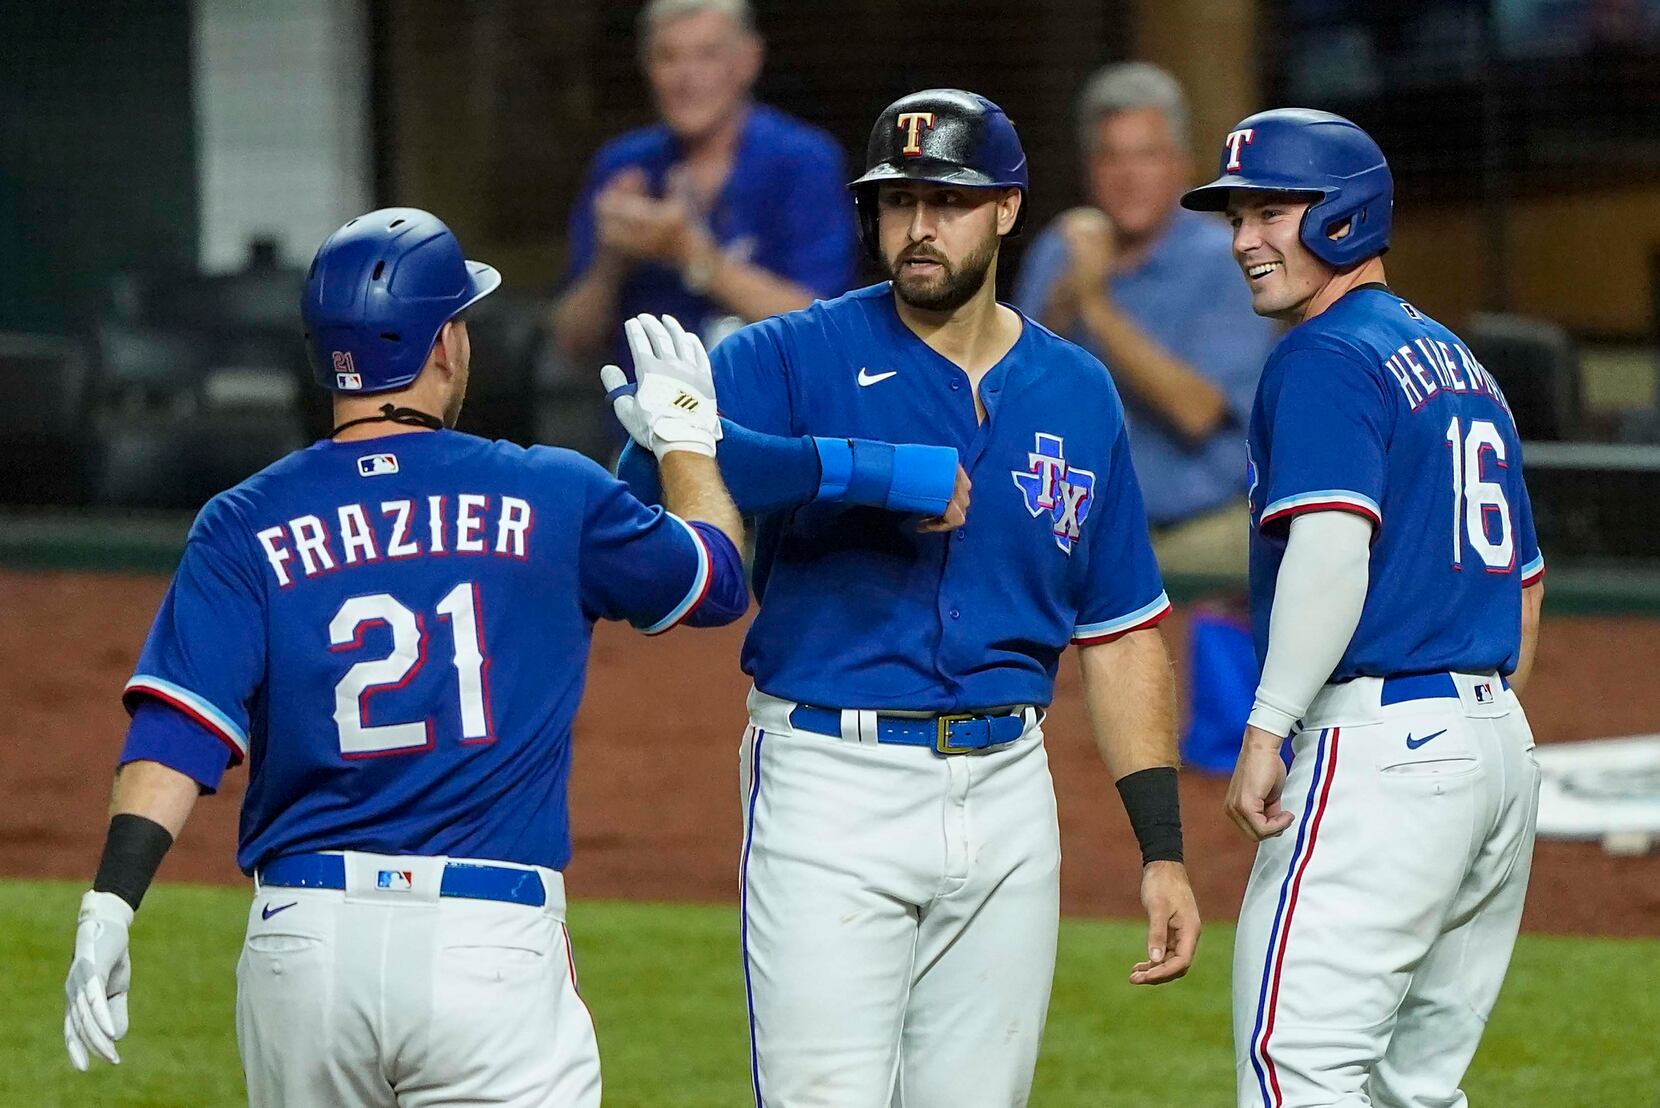 Texas Rangers: Kiner-Falefa makes MLB debut with parents in stands